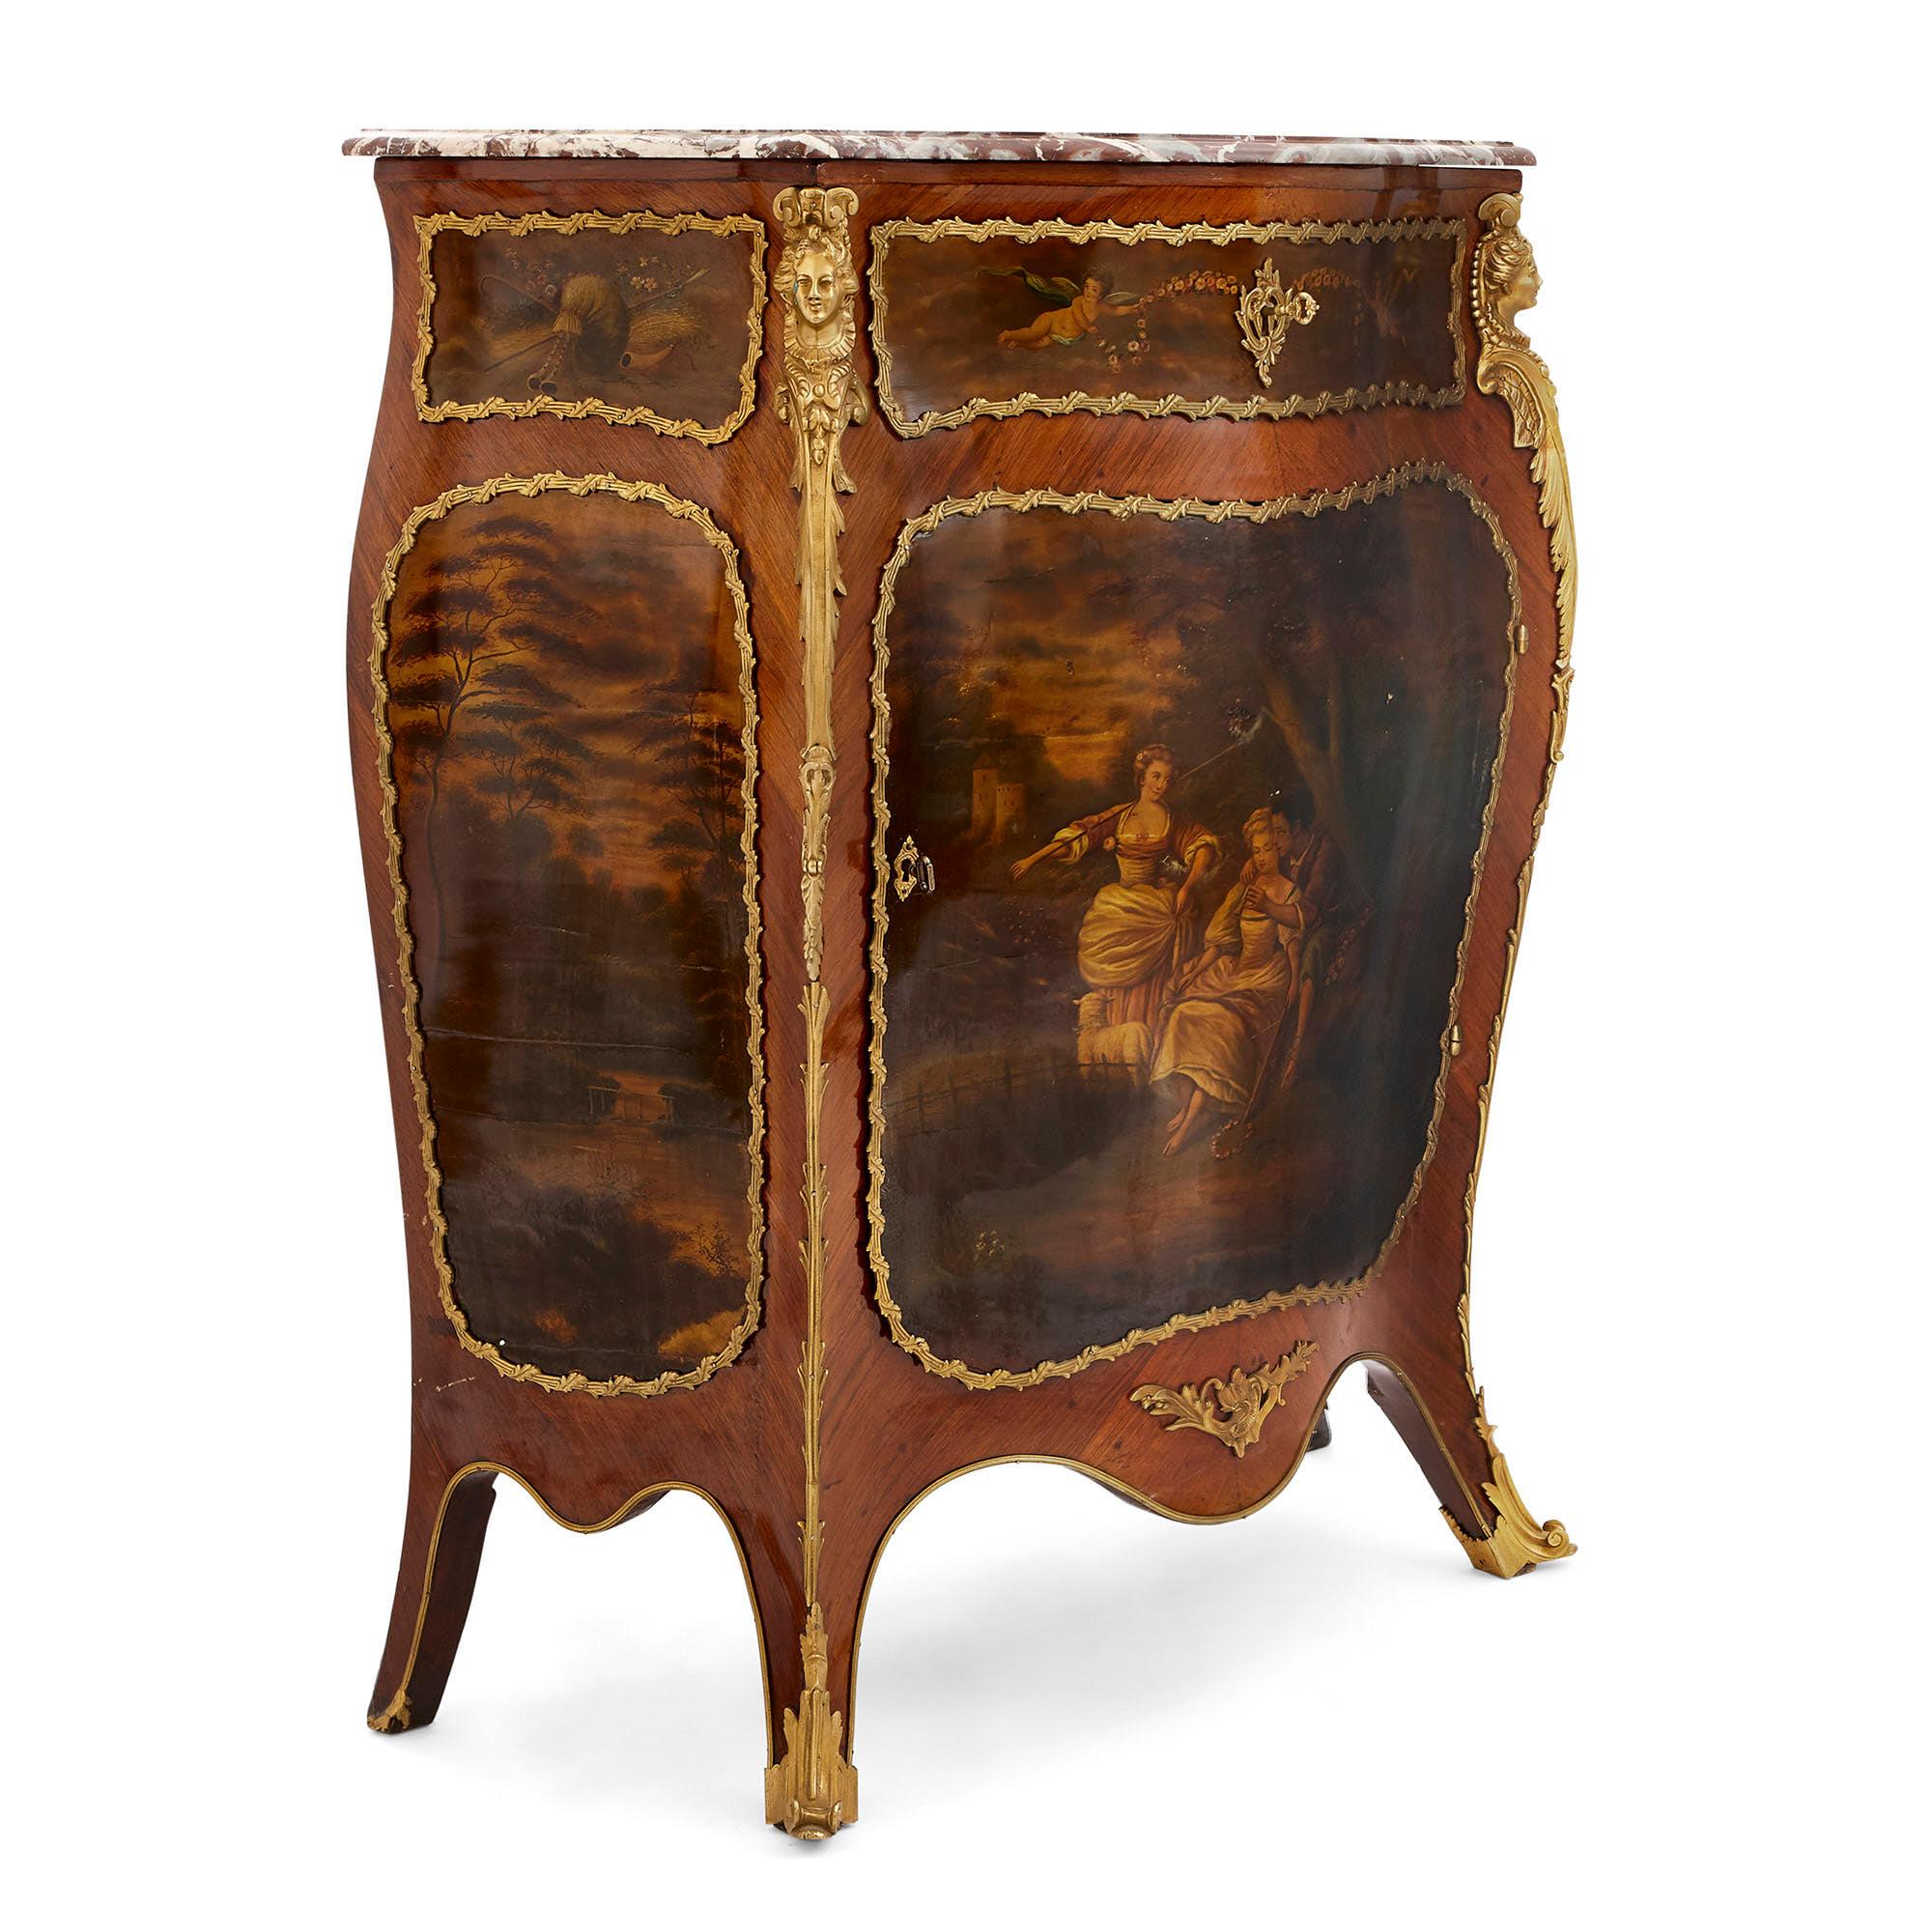 This kingwood cabinet is an exquisite piece of antique French furniture, which is decorated with beautiful vernis Martin panels. Vernis Martin is a type of imitation lacquer, which first became fashionable in the 18th Century. The technique was